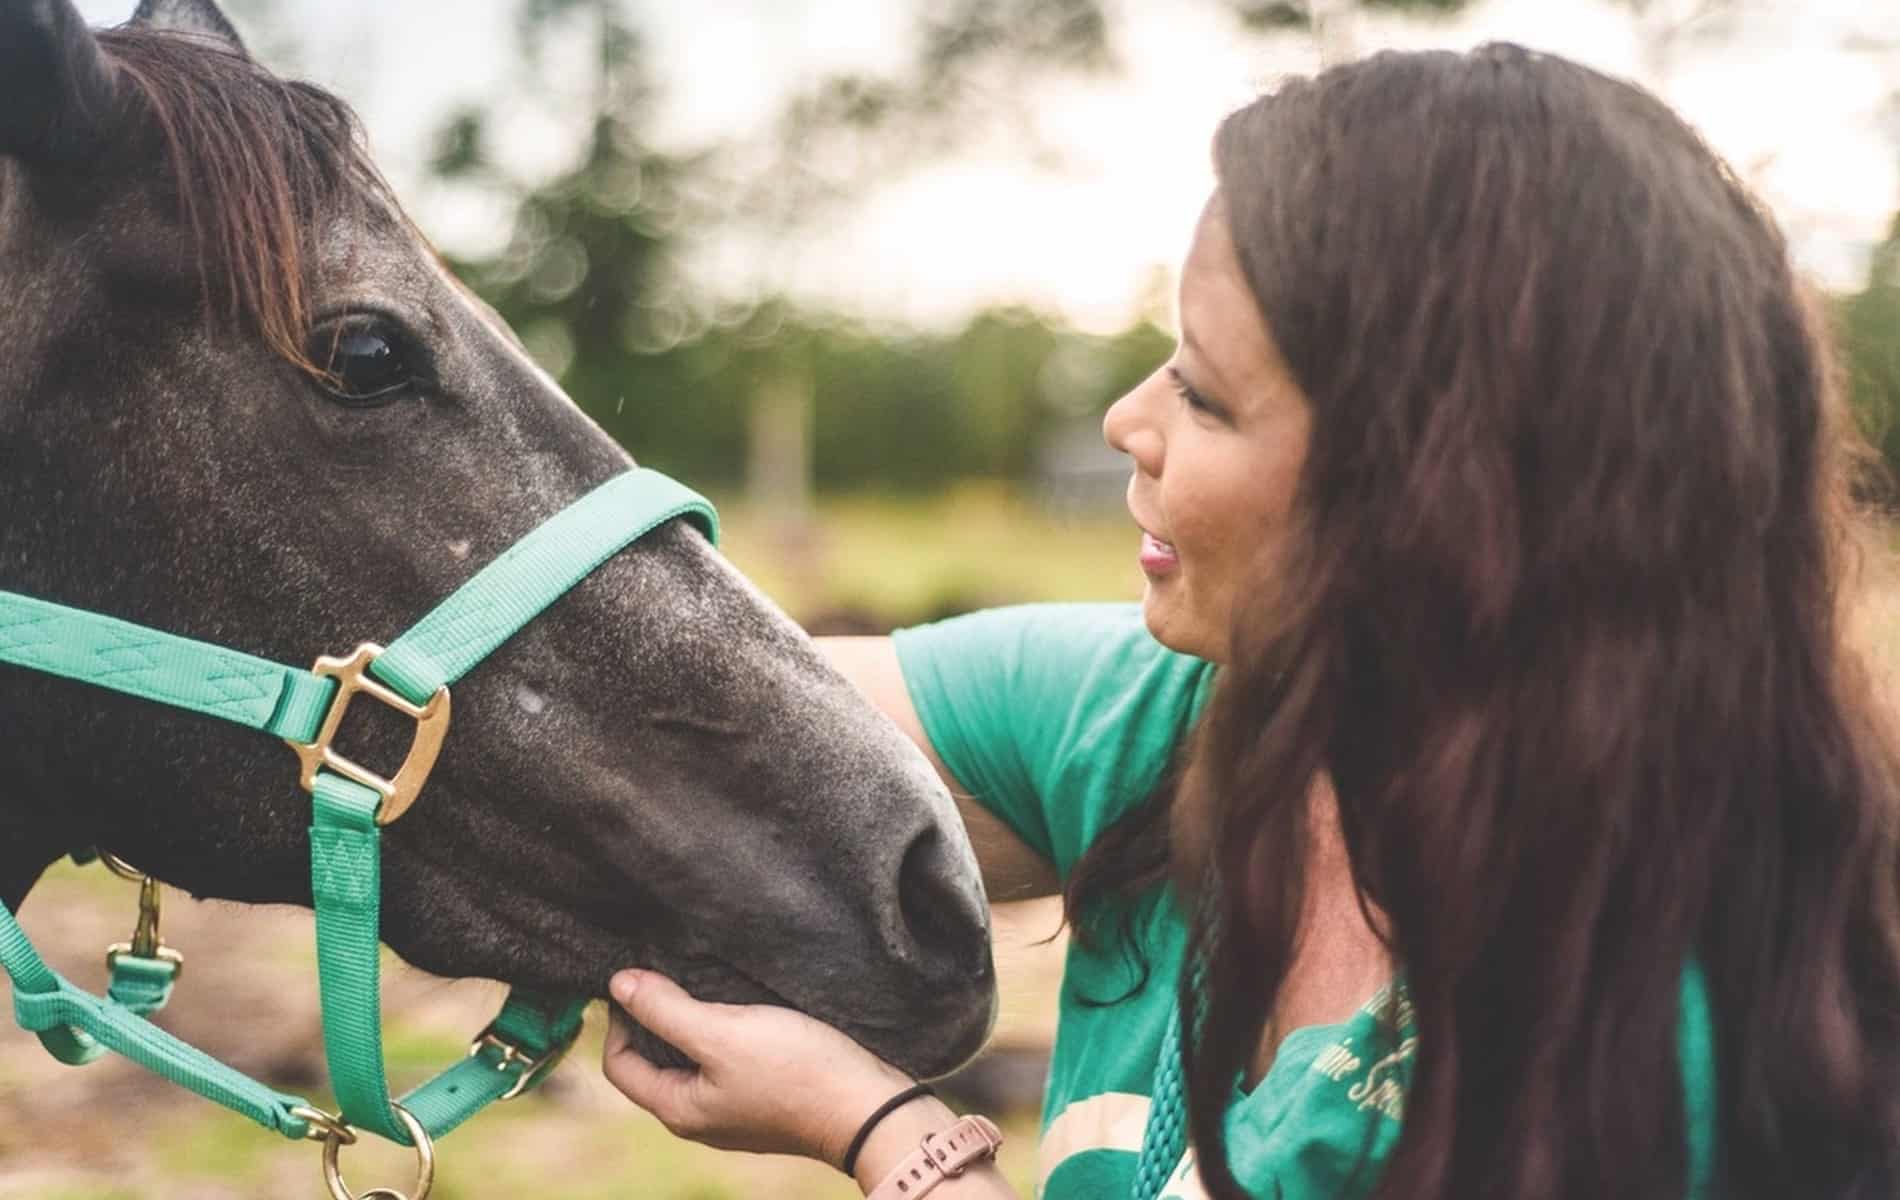 Healing Hoof Steps Brings Equine Therapy to Northwest Florida